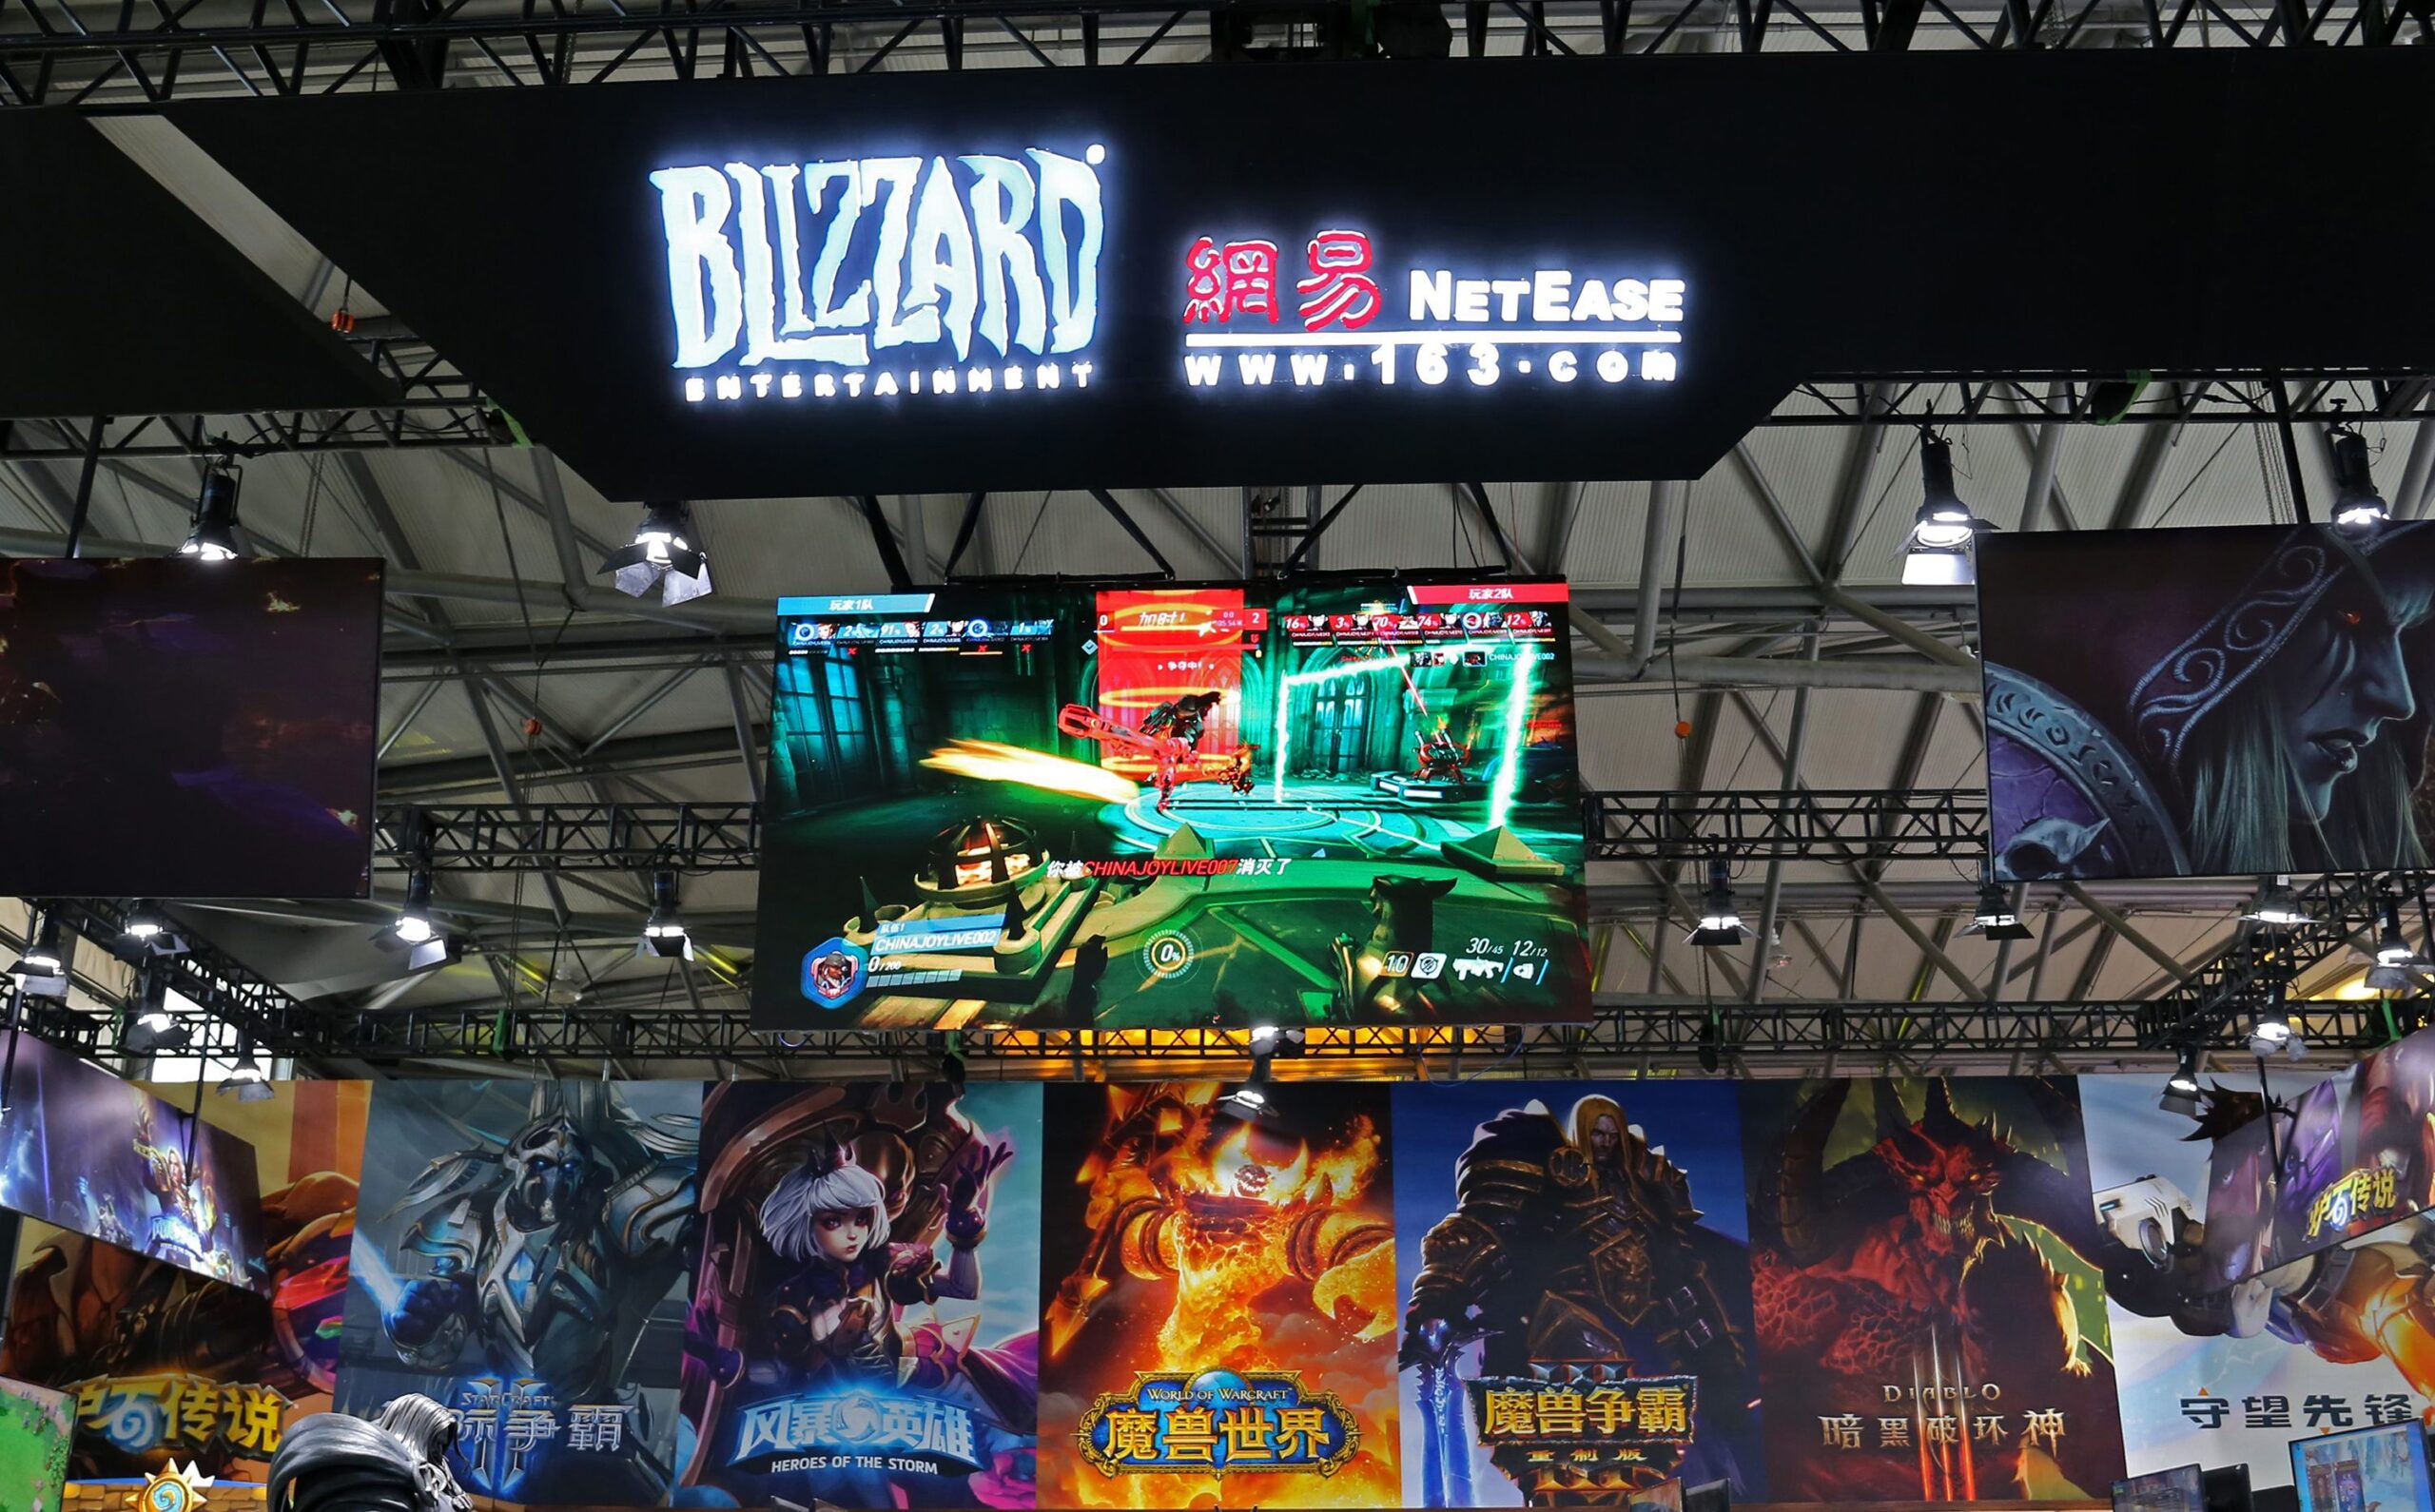 ‘World of Warcraft’ and other hit games return to China as Blizzard and NetEase end dispute - Entertainment - News